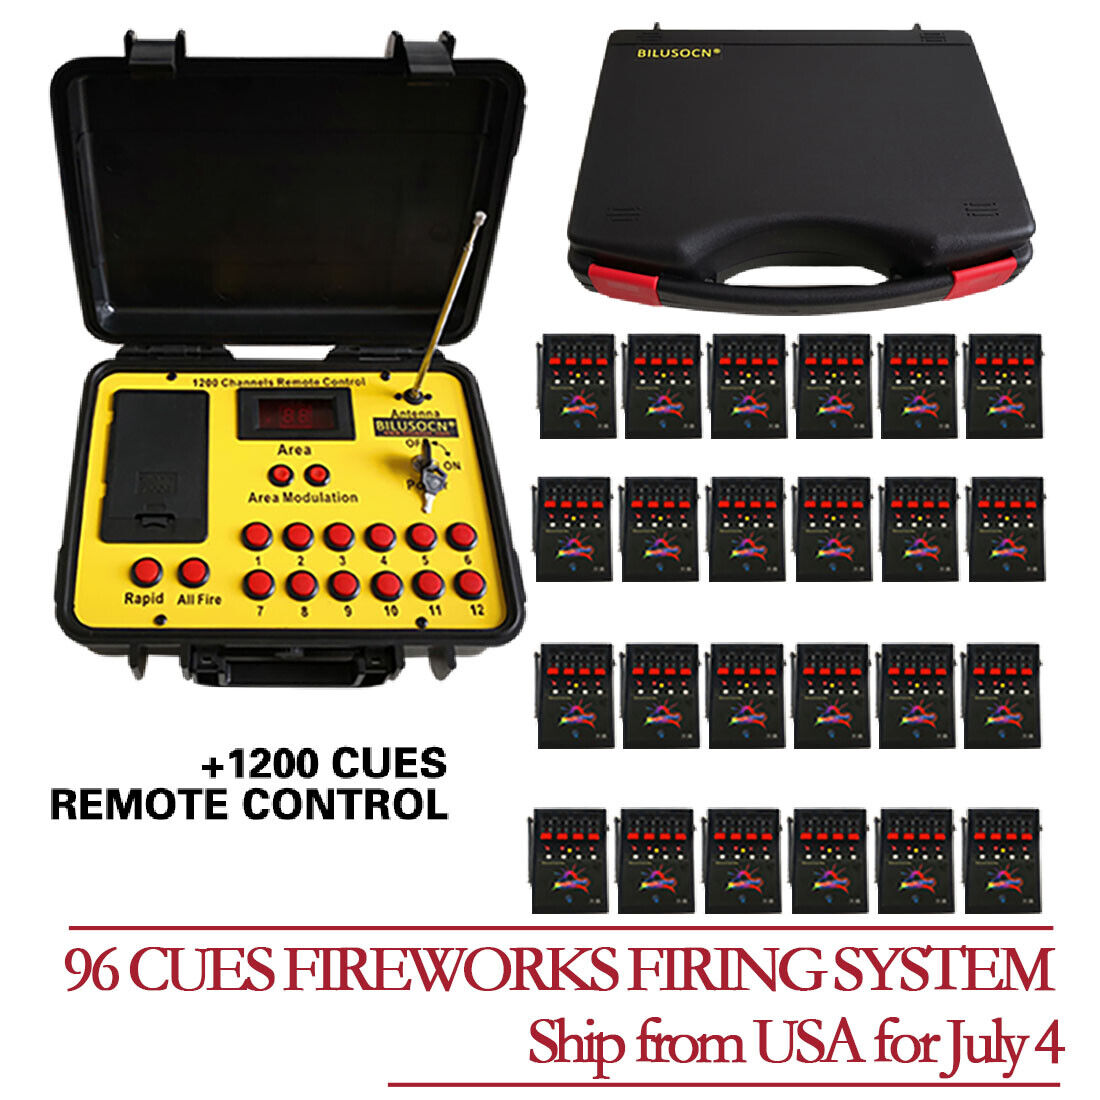 96 Cues fireworks firing system 300M distance remote control 